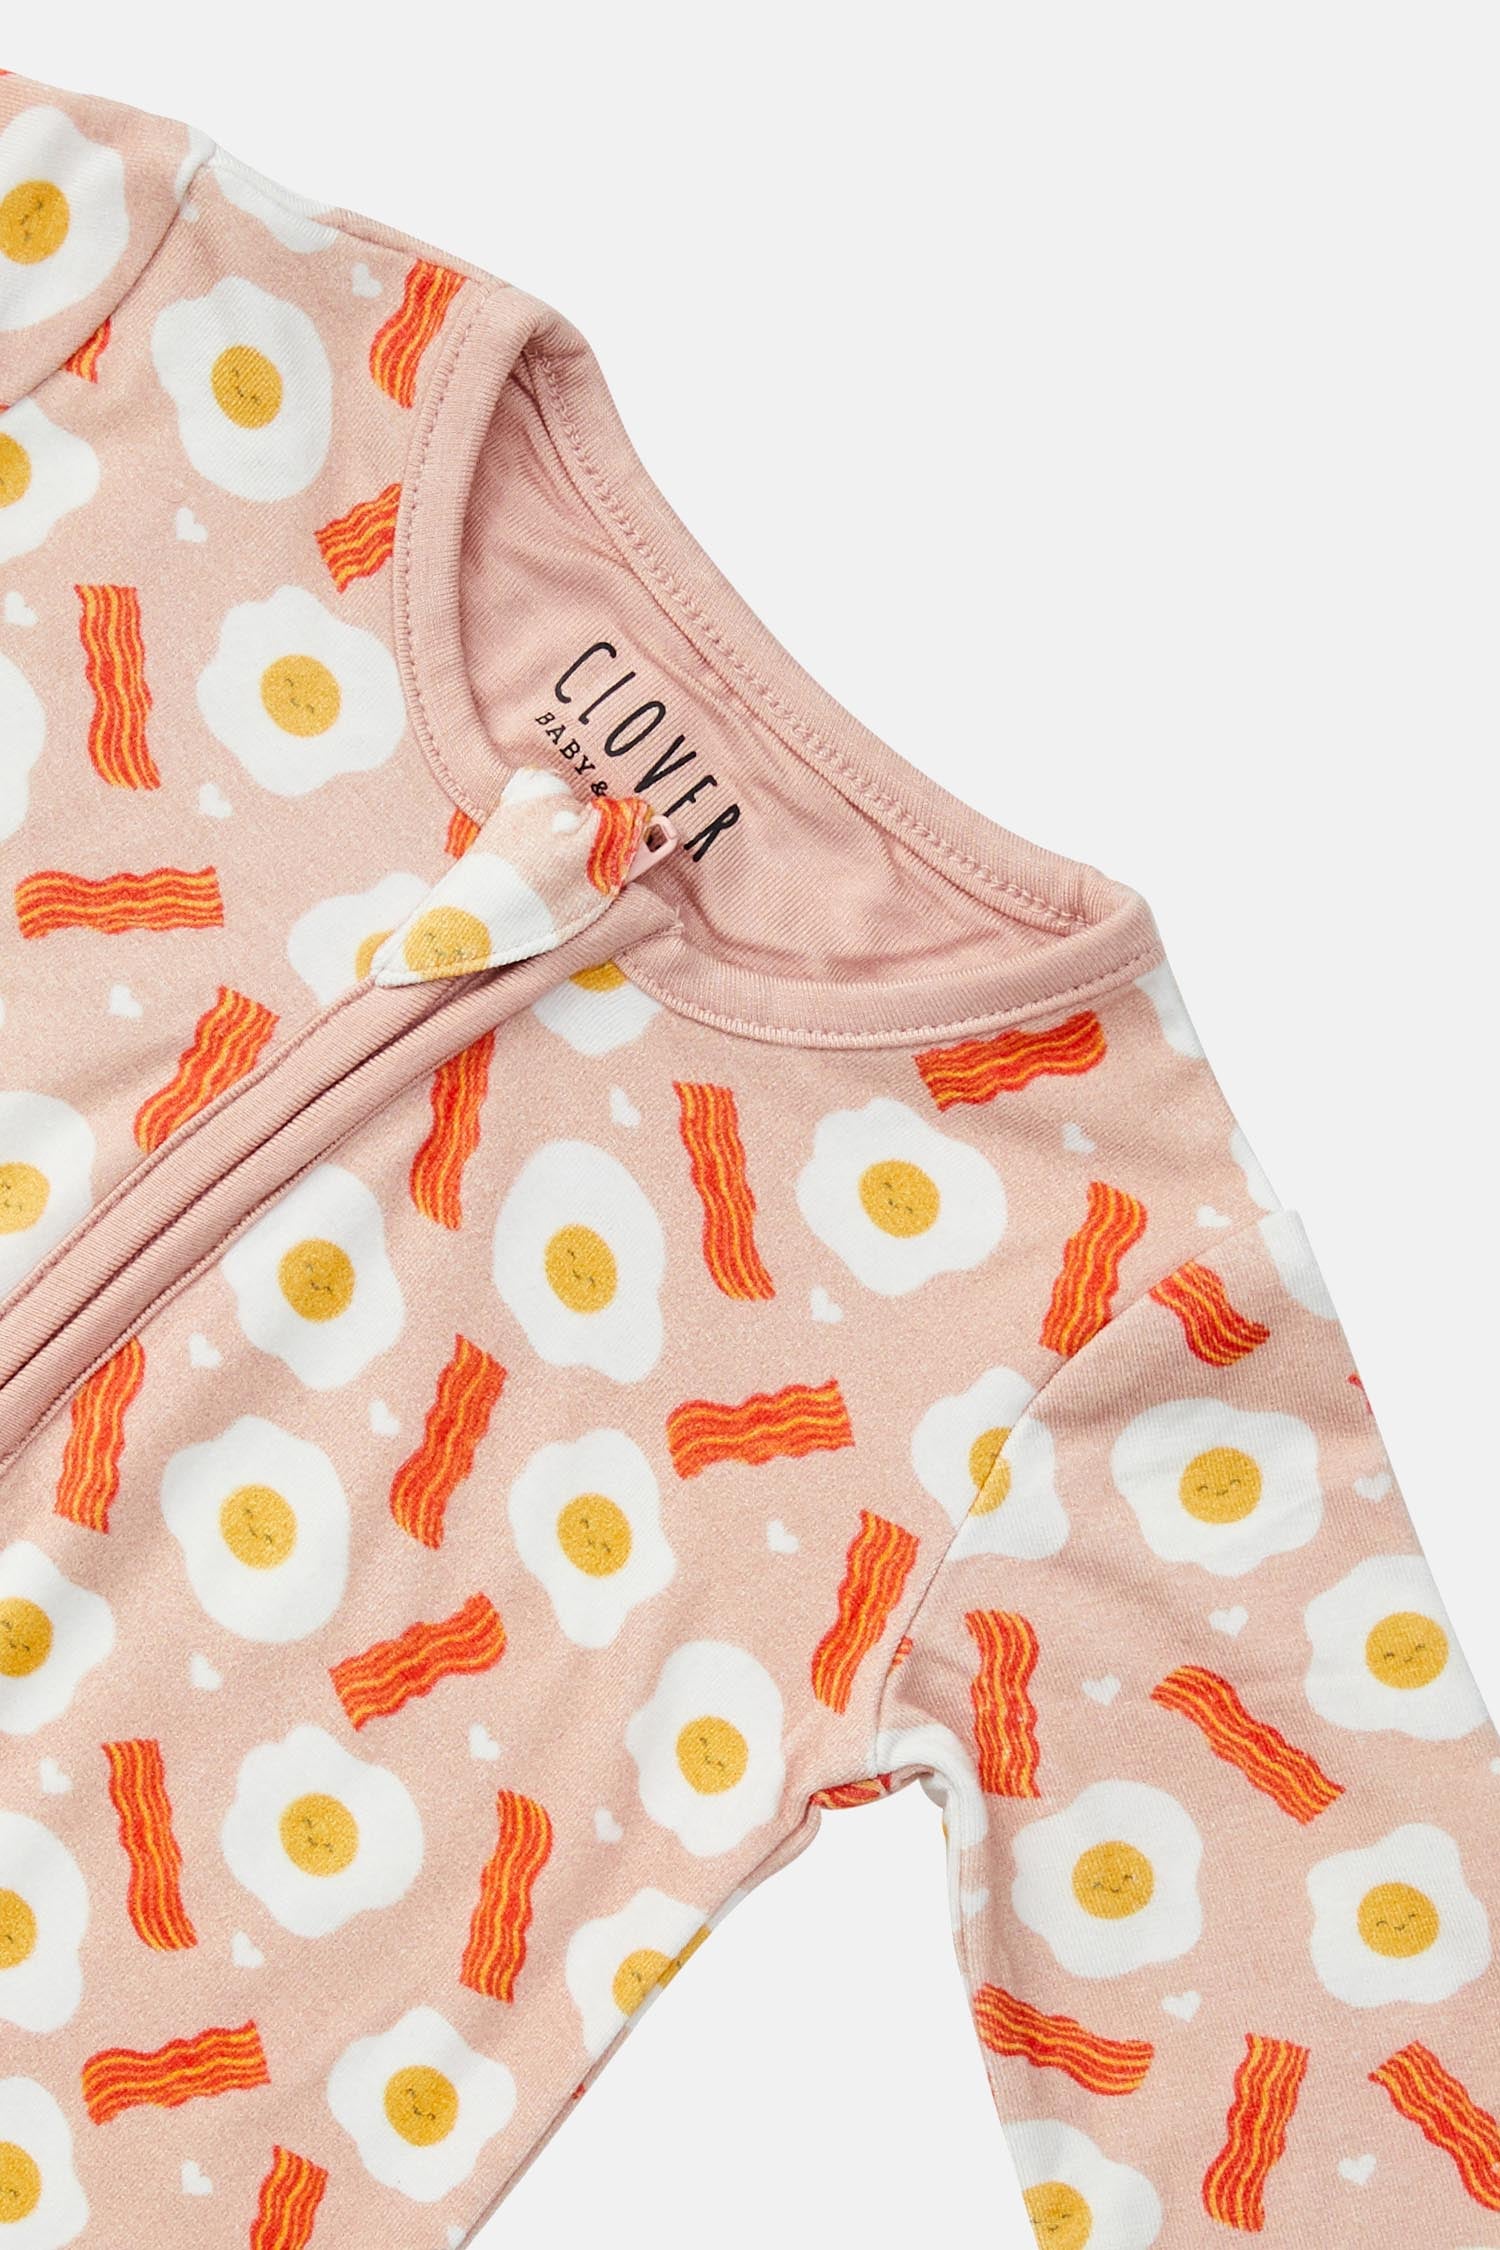 Soft &amp; Stretchy Zipper Footie - Bacon &amp; Eggs Pink